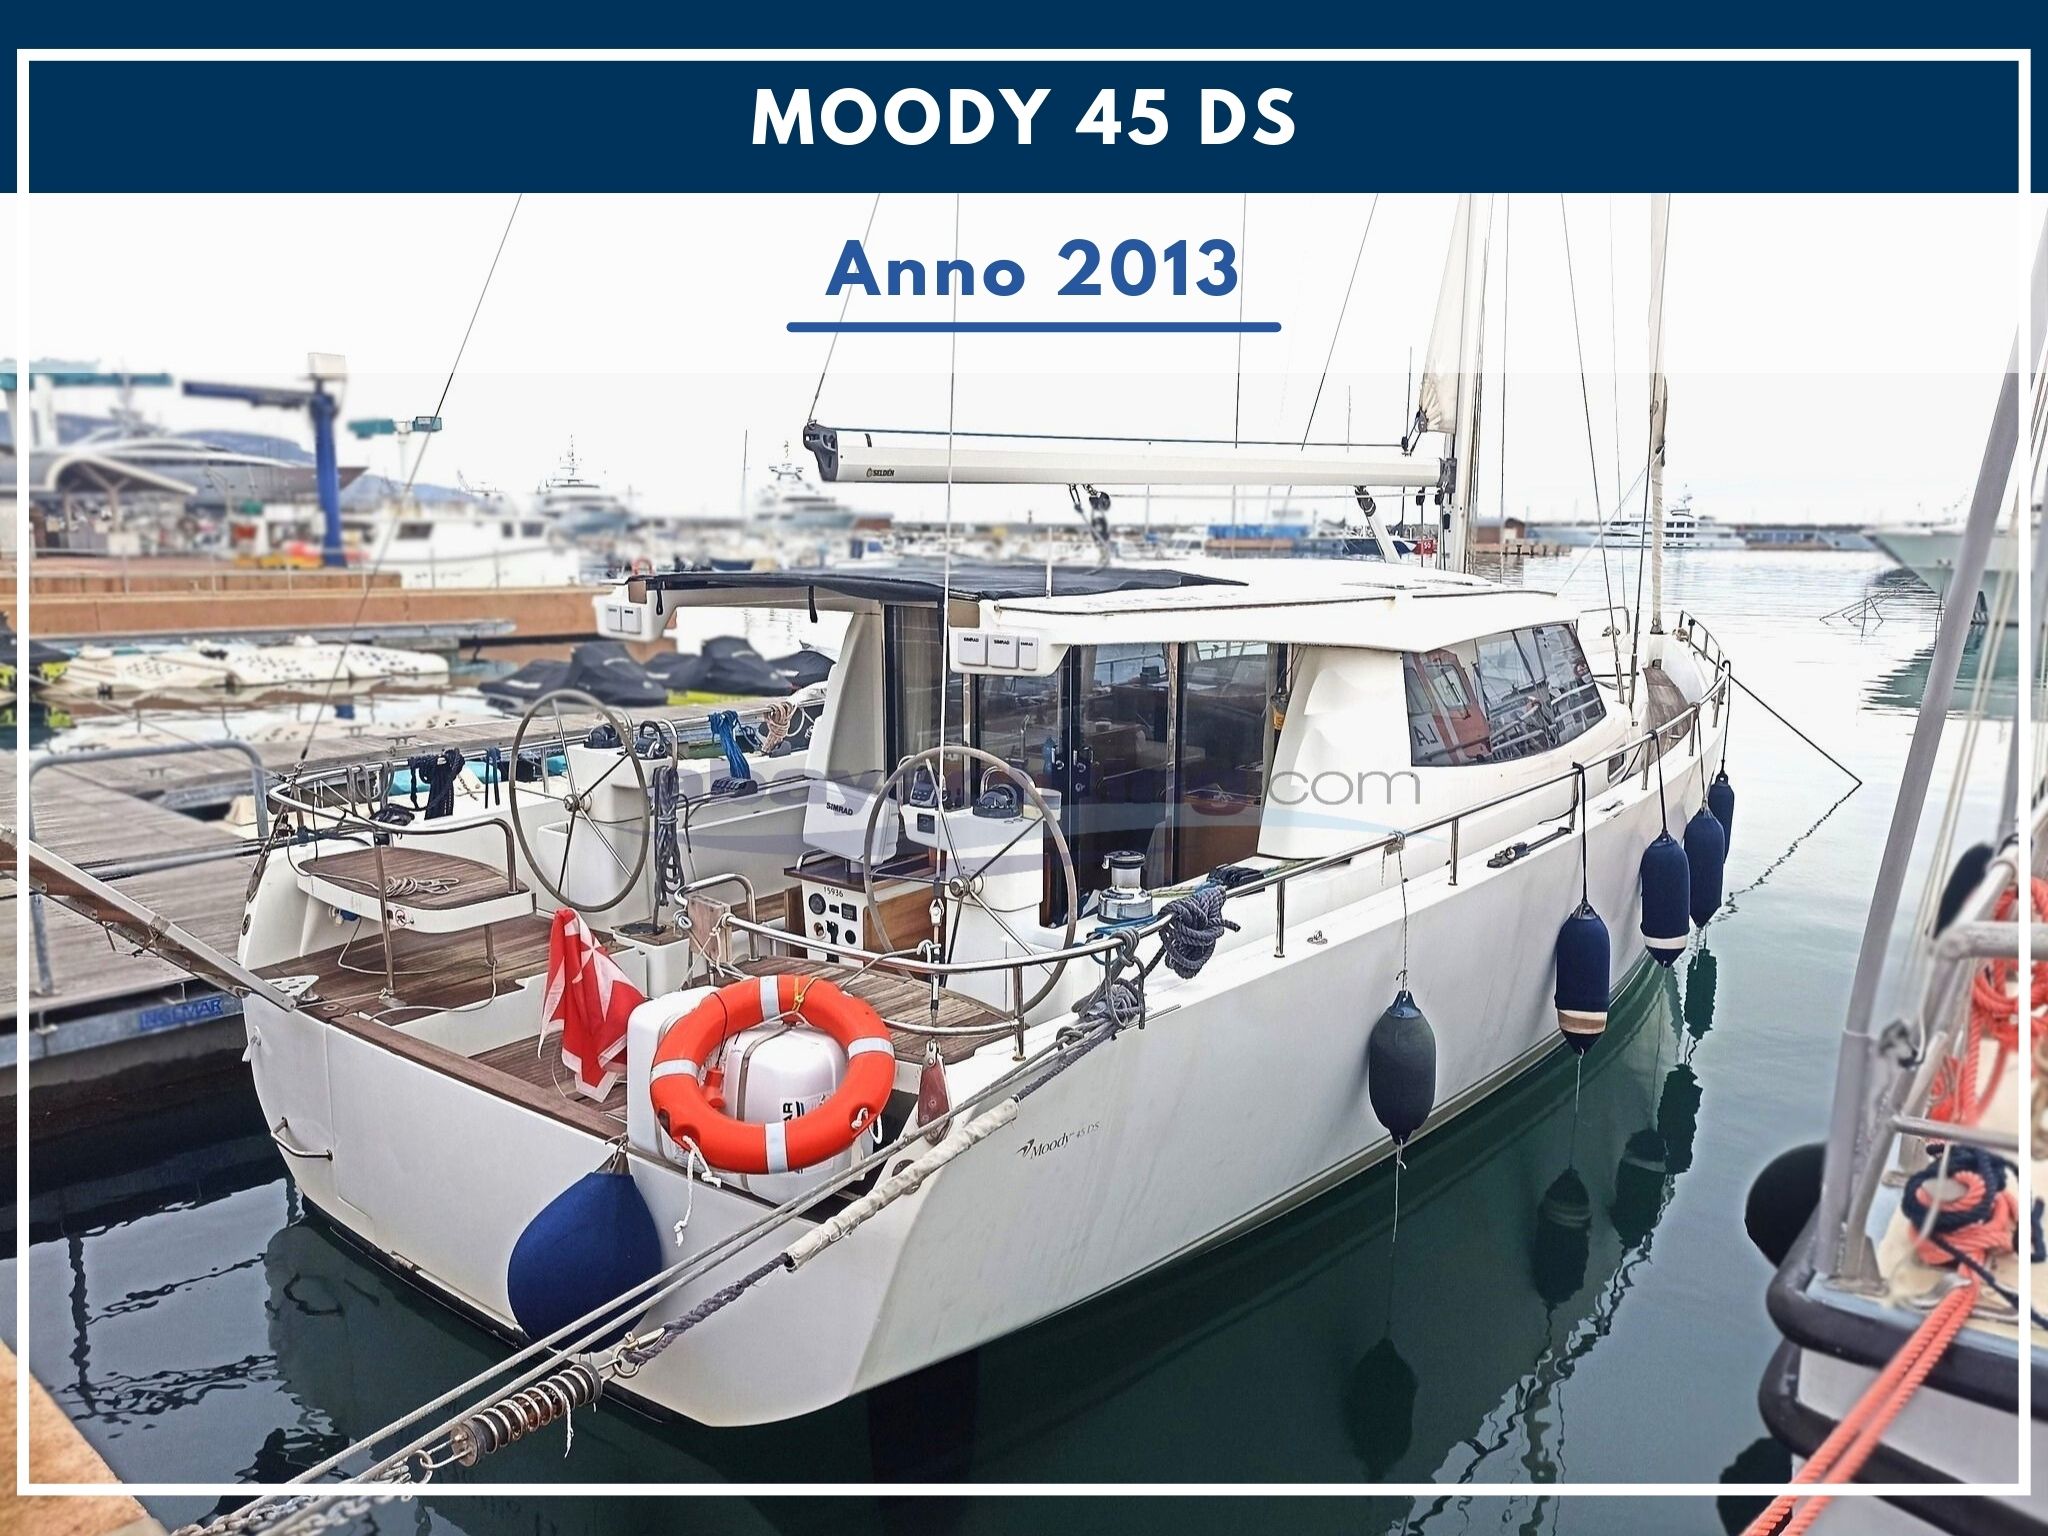 Nuovo Arrivo: Moody 45 Ds